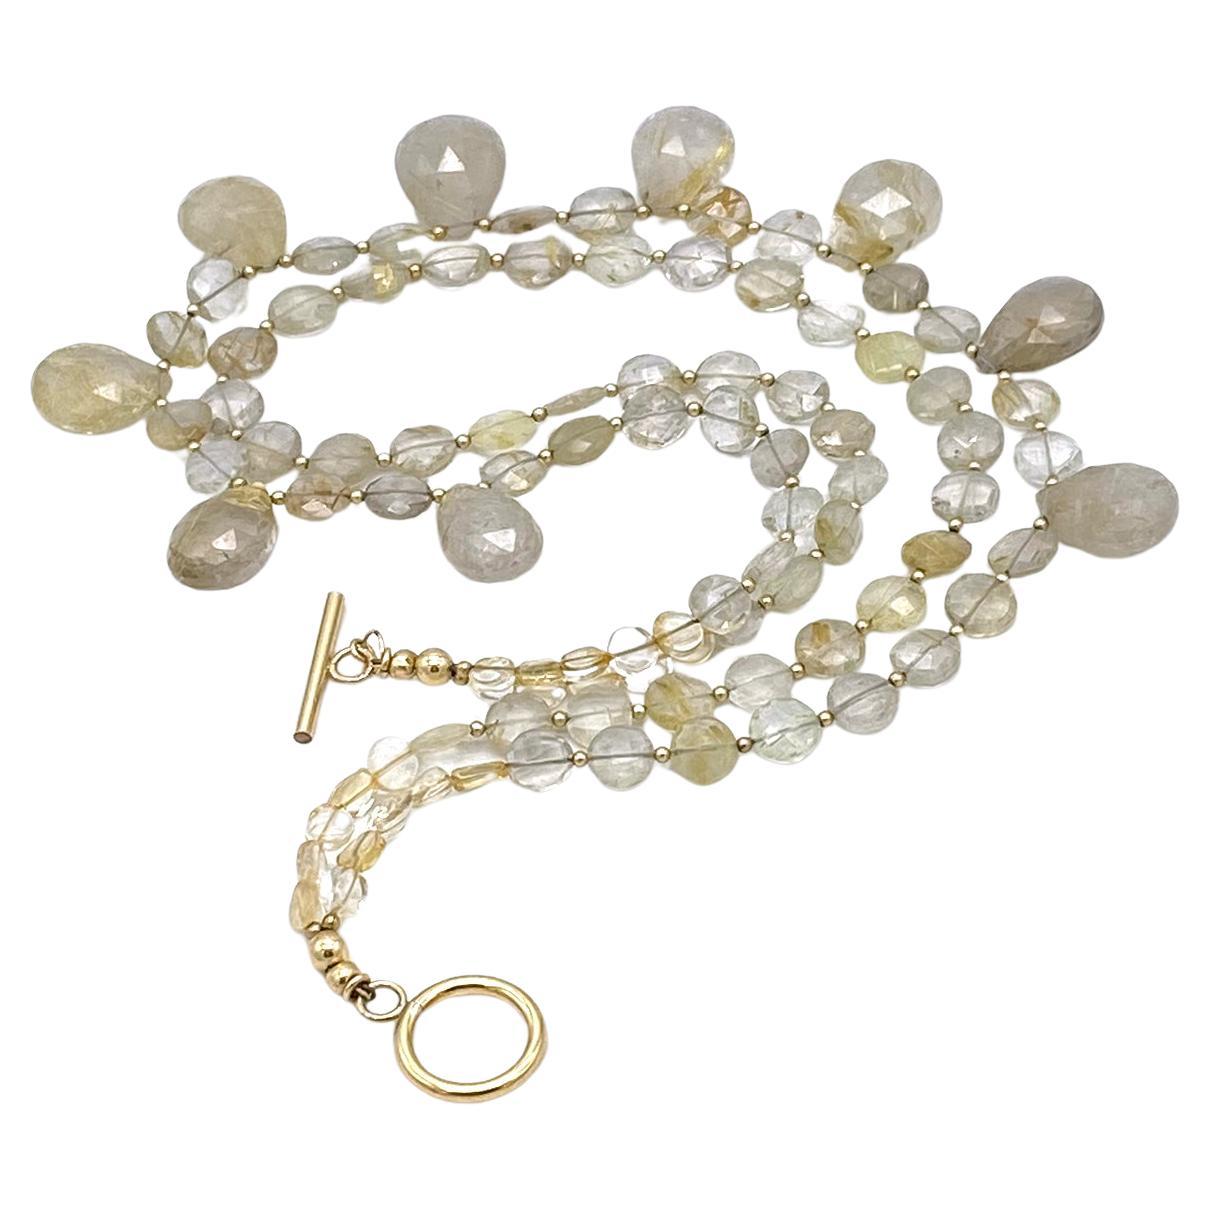 This is a golden rutilated quartz briolette necklace. We created this double strand necklace with up to 20 mm faceted pear briolettes and up to 10 mm coin shaped rutilated quartz plus a 14K gold filled toggle clasp and 1.5mm spacer beads. It's low